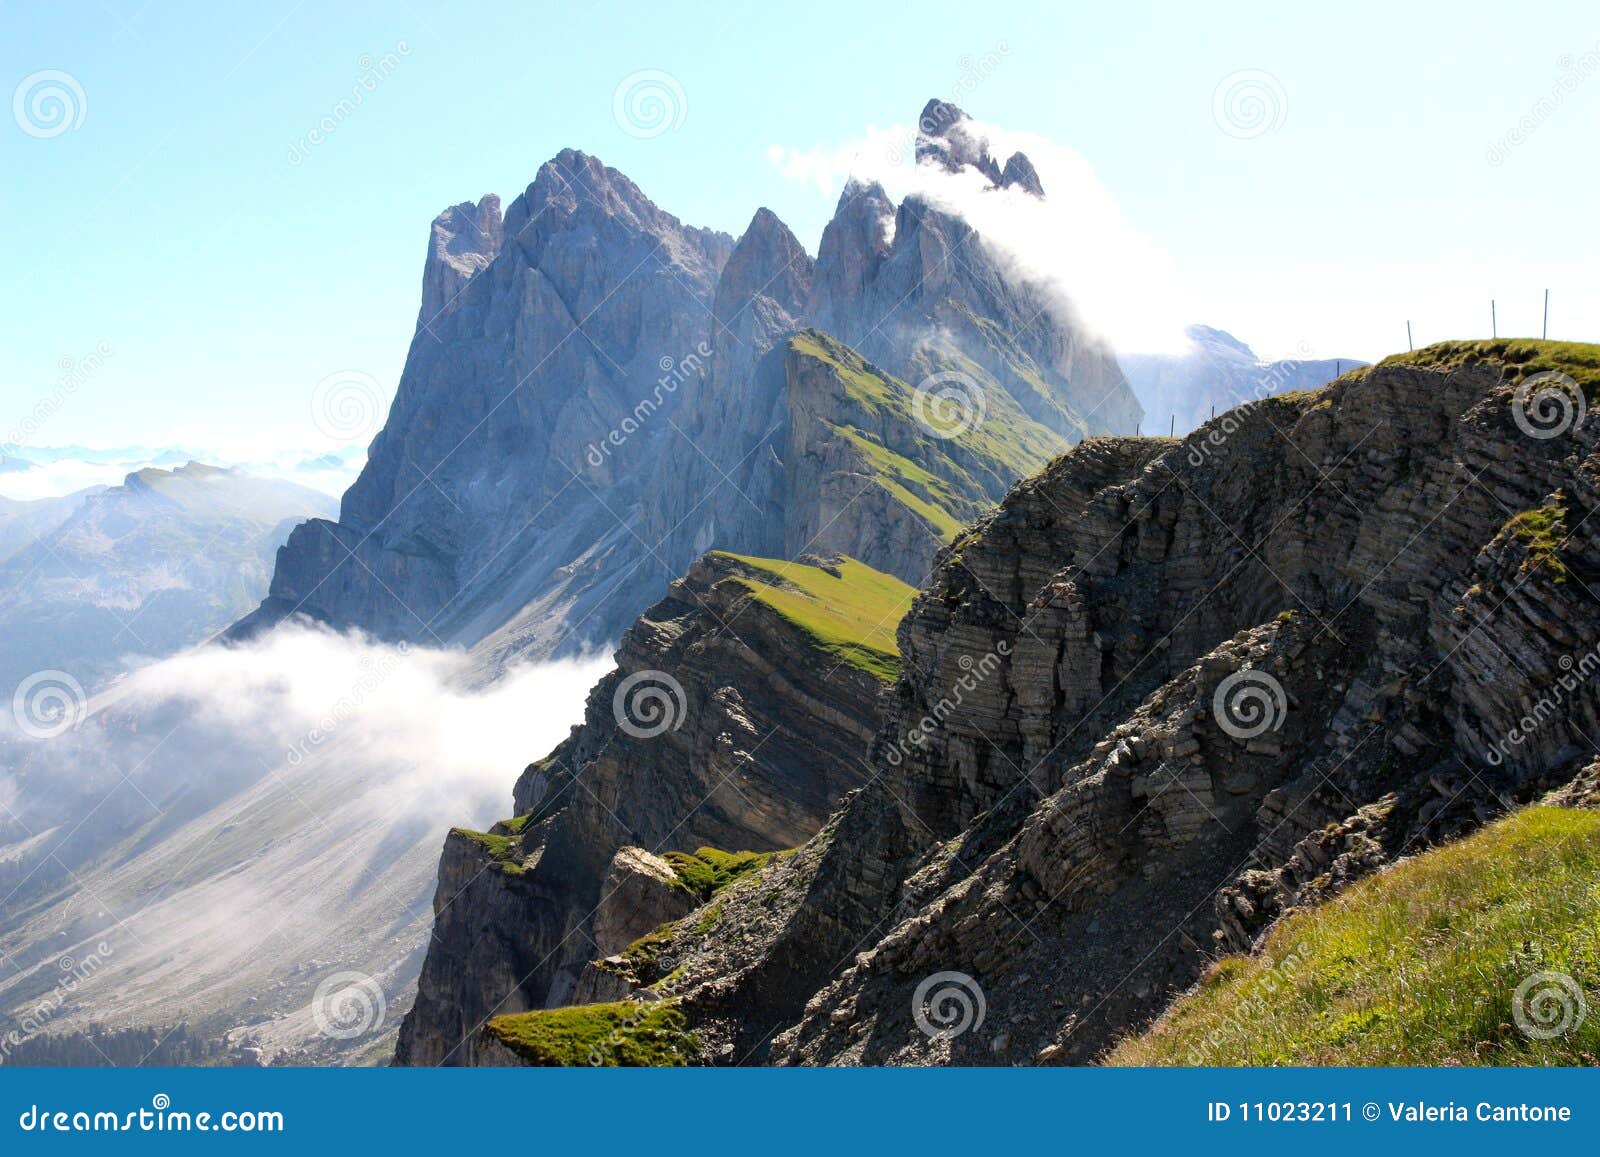 the odle mountains, dolomites in italy